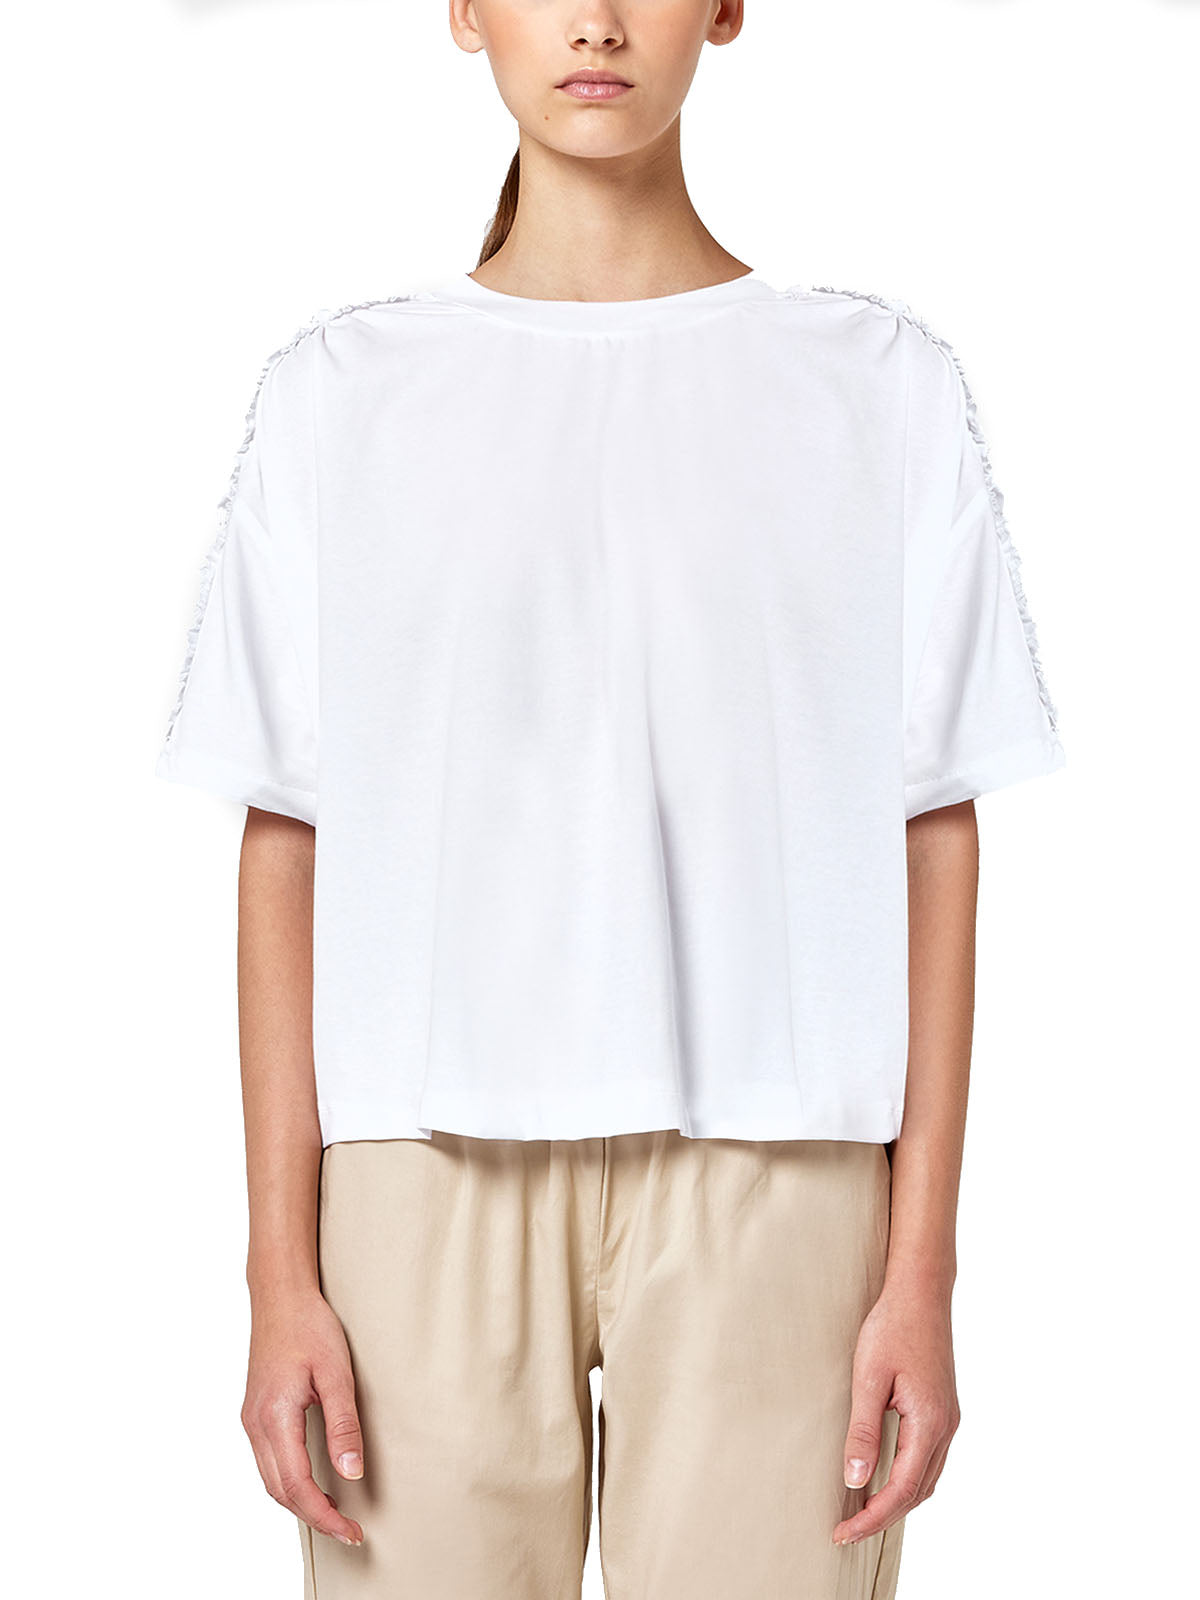 Alpha Studio Woman T-Shirt - Round Neck T-Shirt S/M Wrinkled Jersey - White